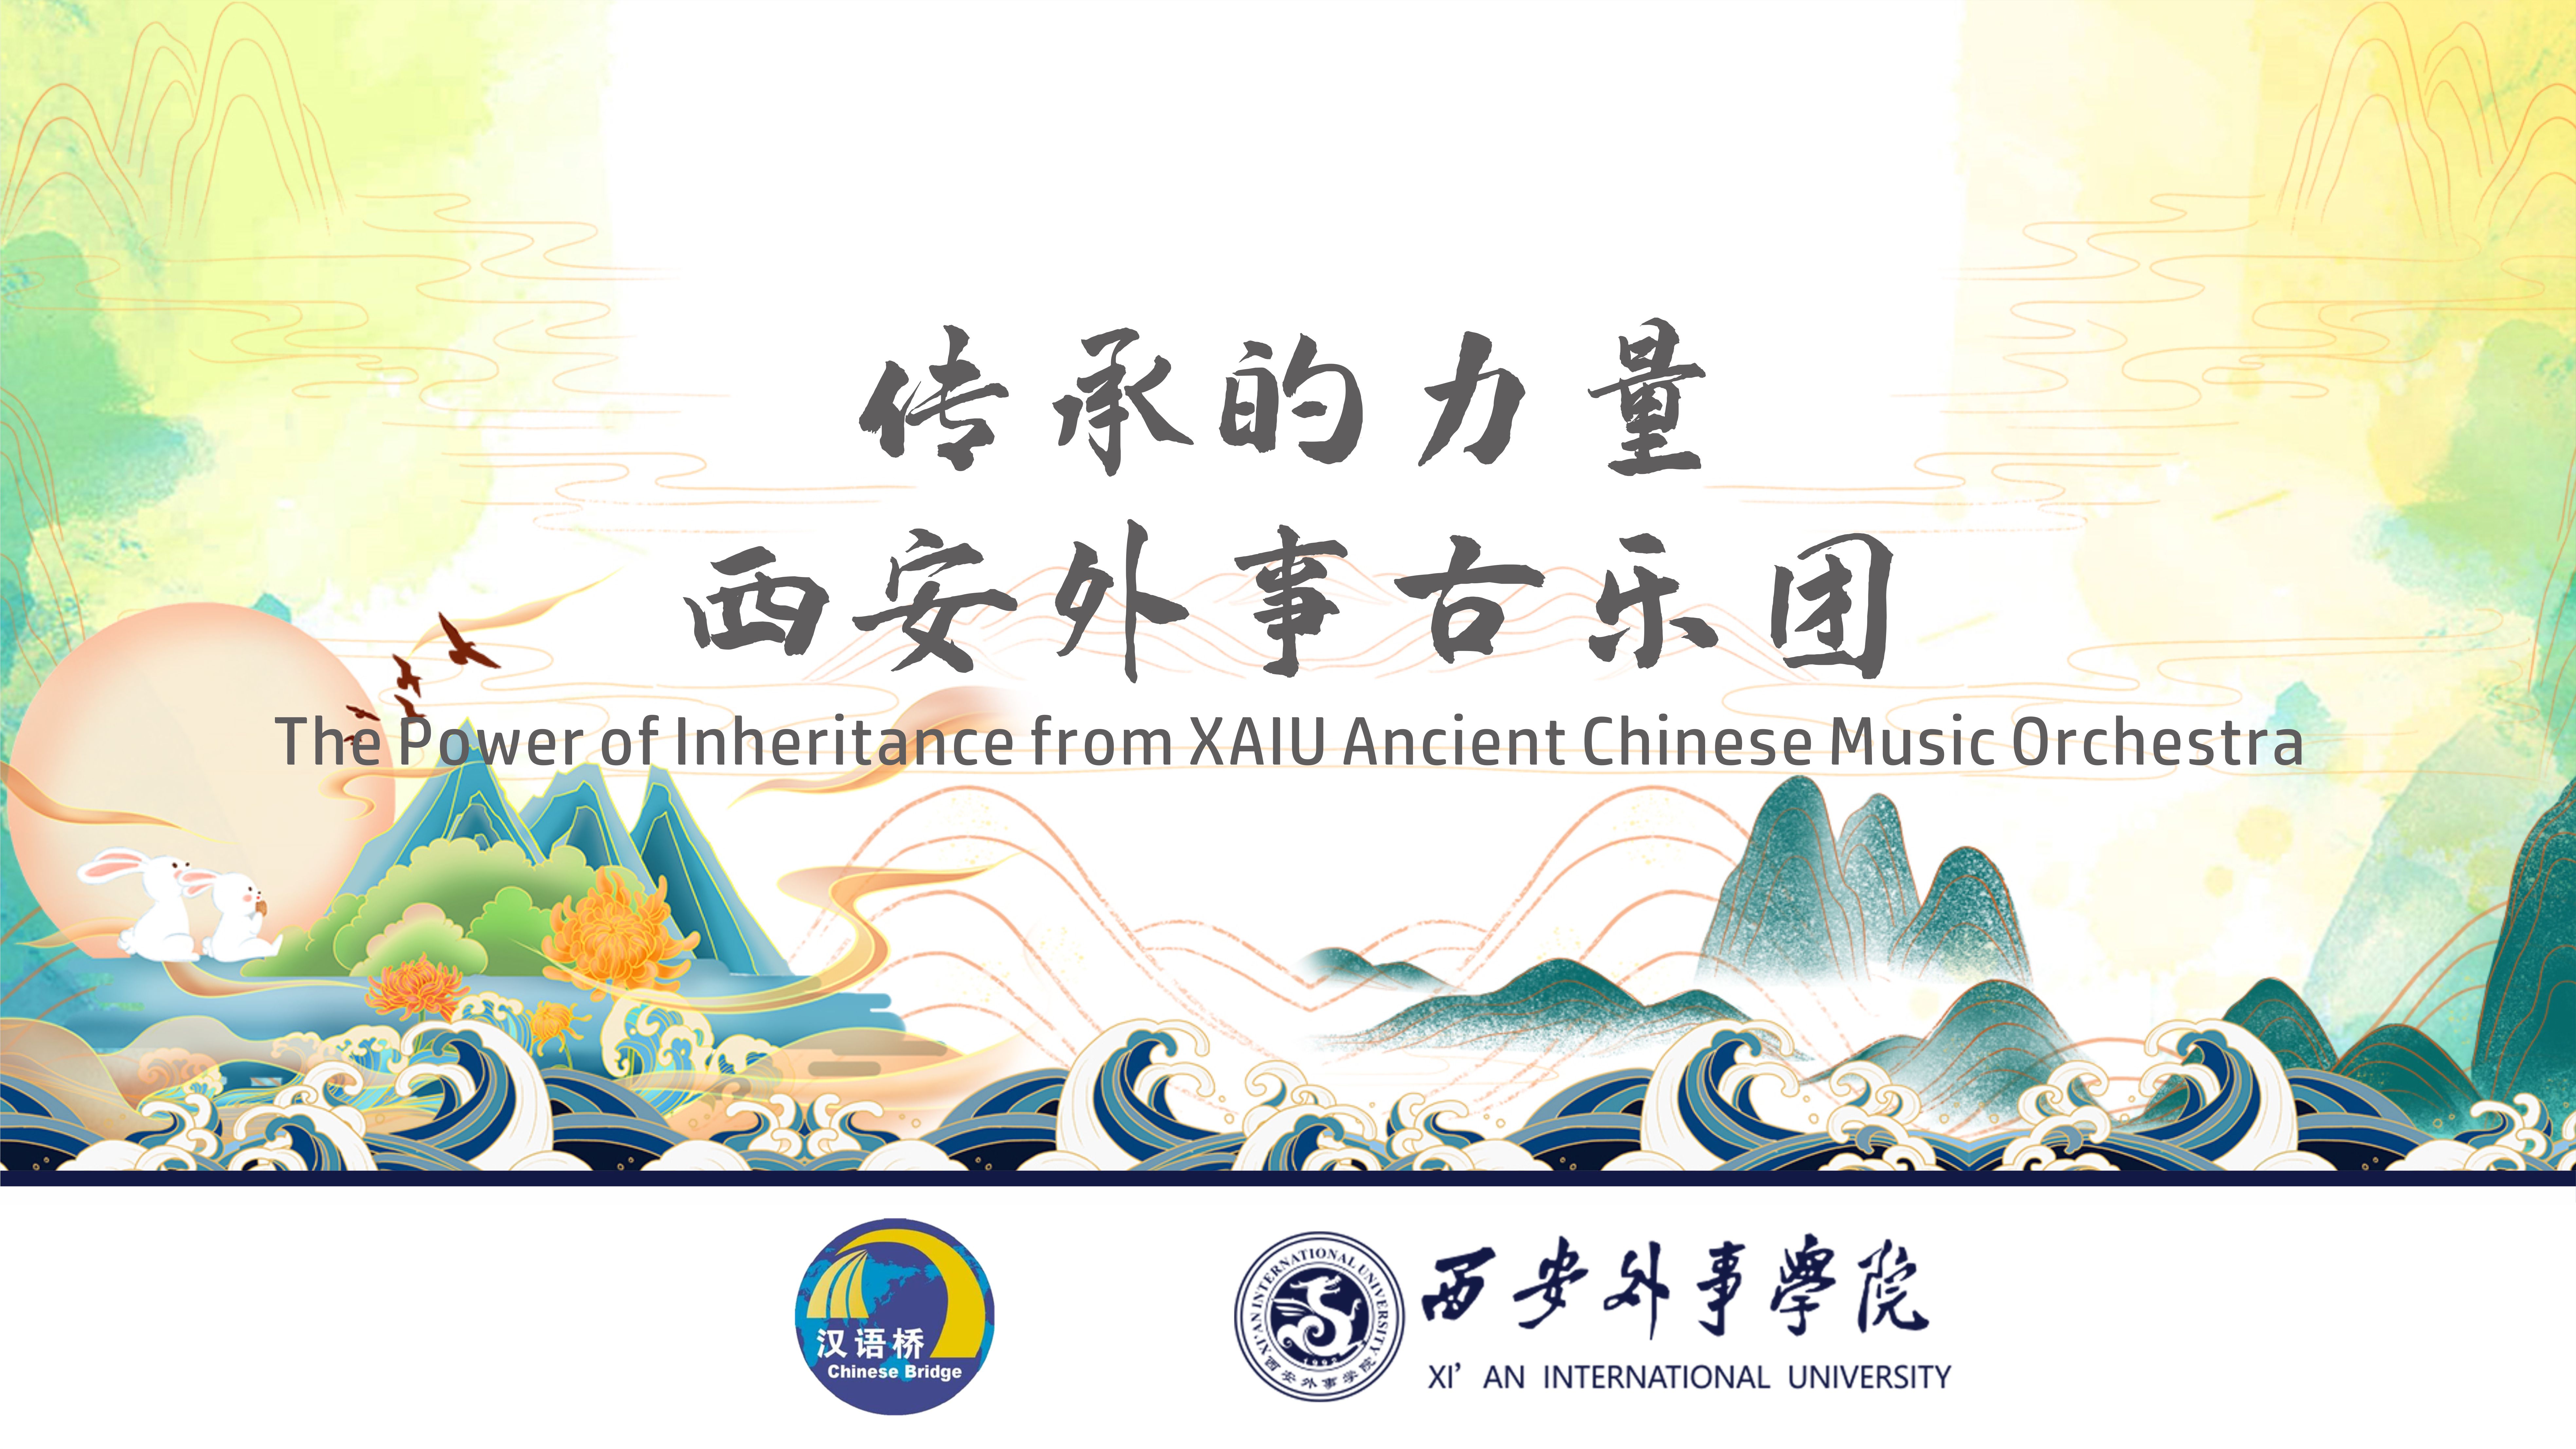 The Power of Inheritance from XAIU Ancient Chinese Music Orchestra